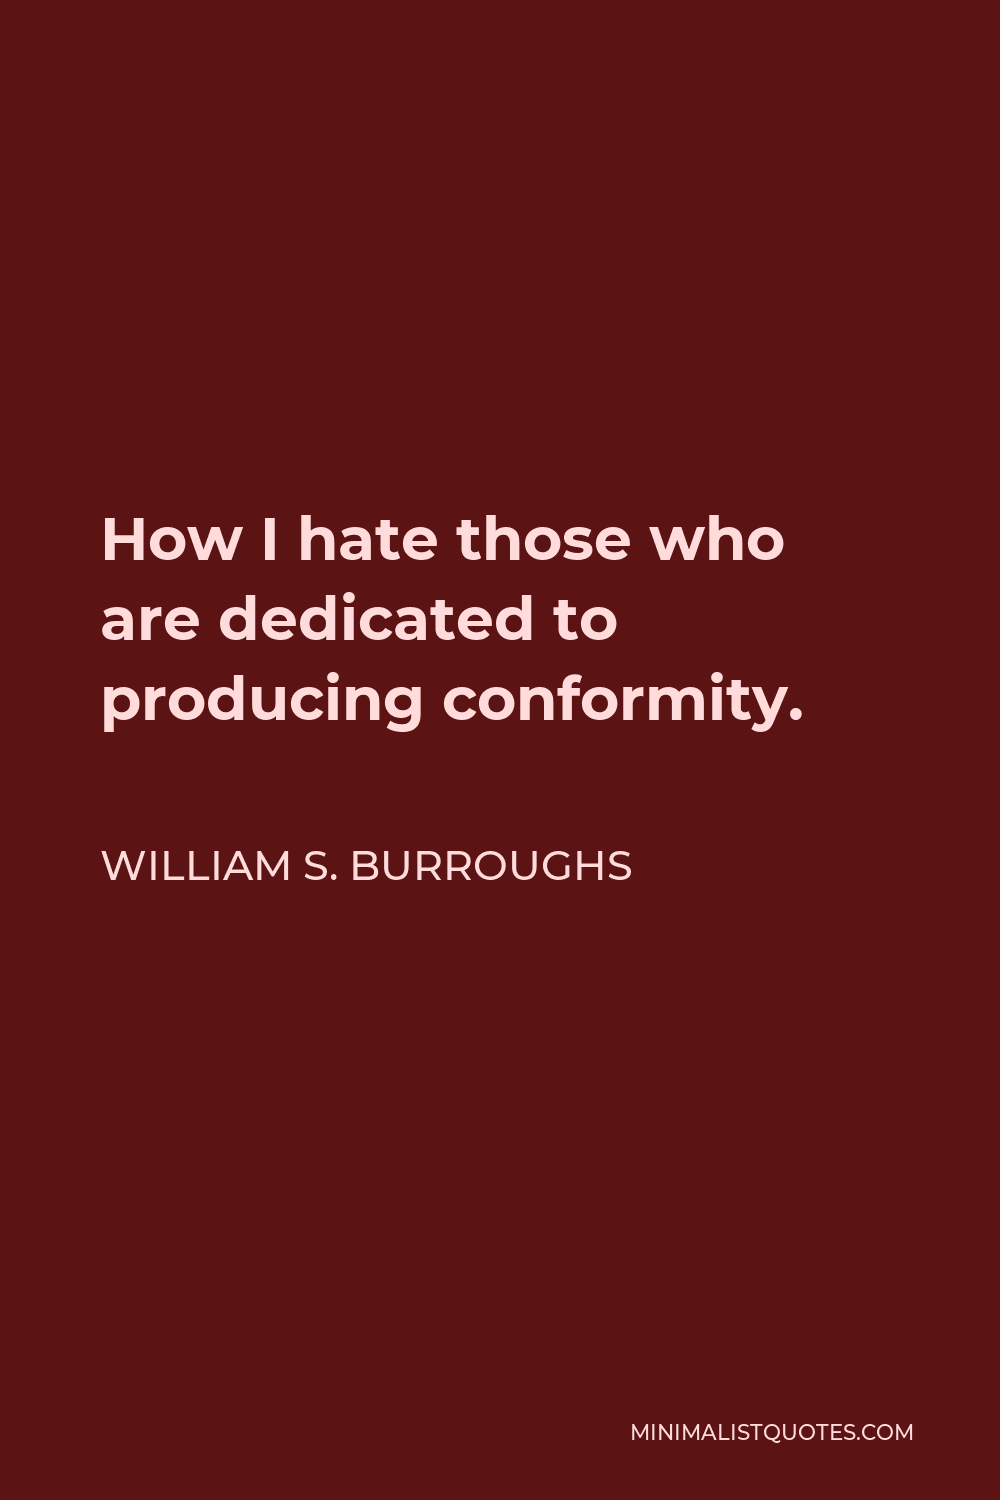 William S. Burroughs Quote - How I hate those who are dedicated to producing conformity.